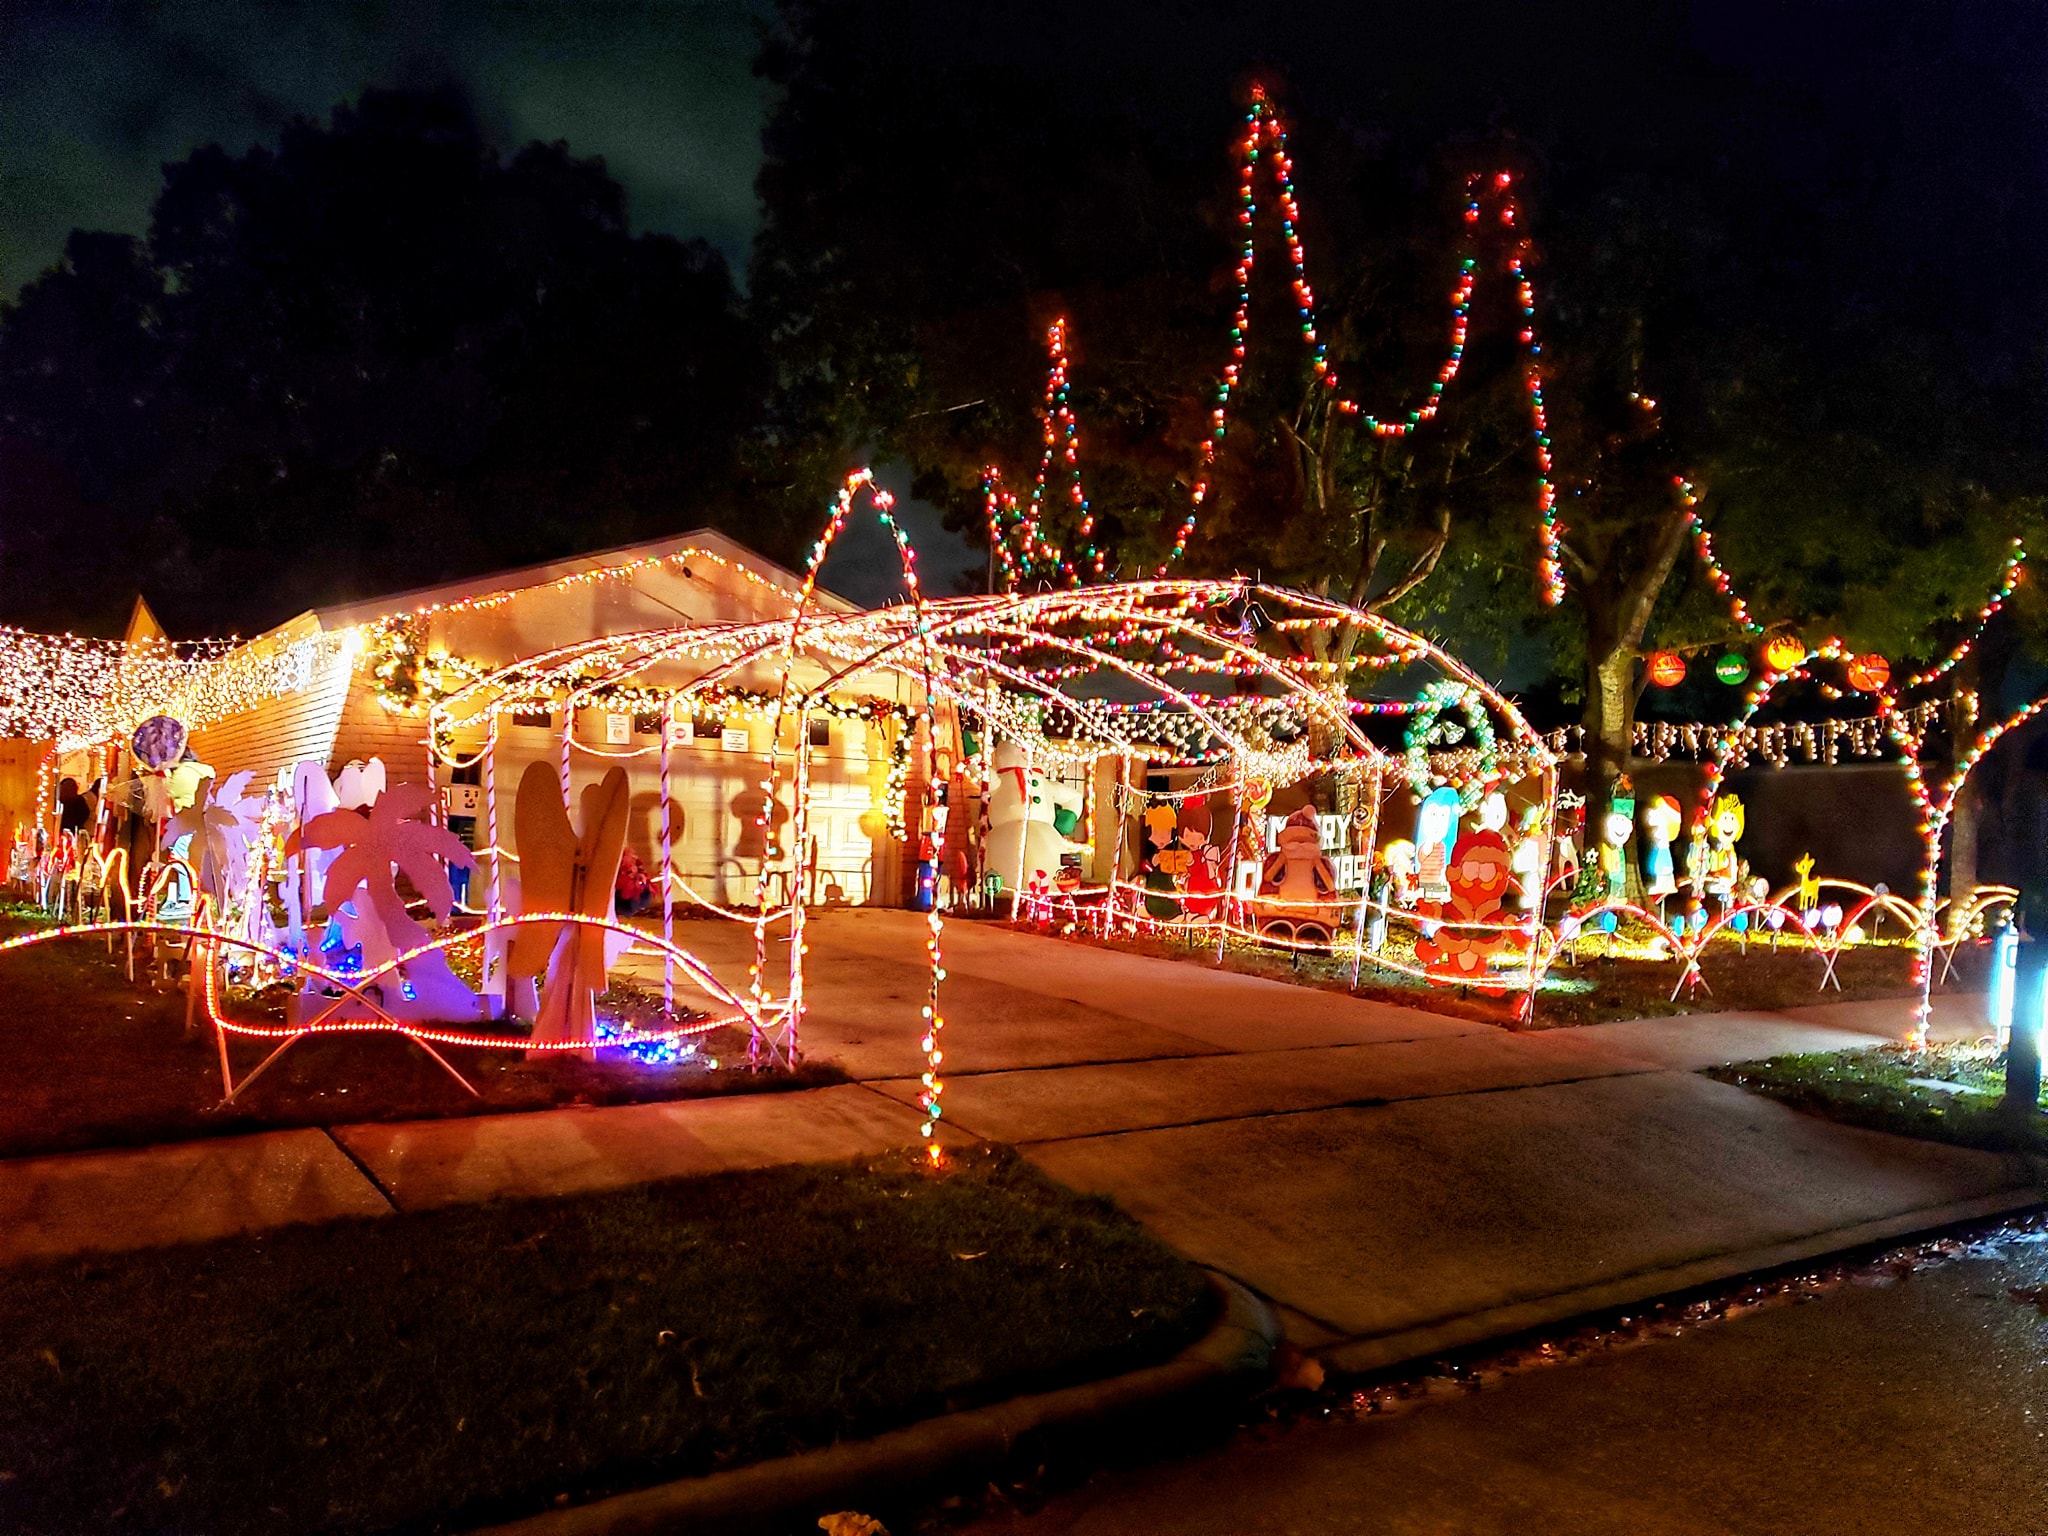 Video: Check out more than 100,000 lights at D&D Christmas Land holiday display in La Porte